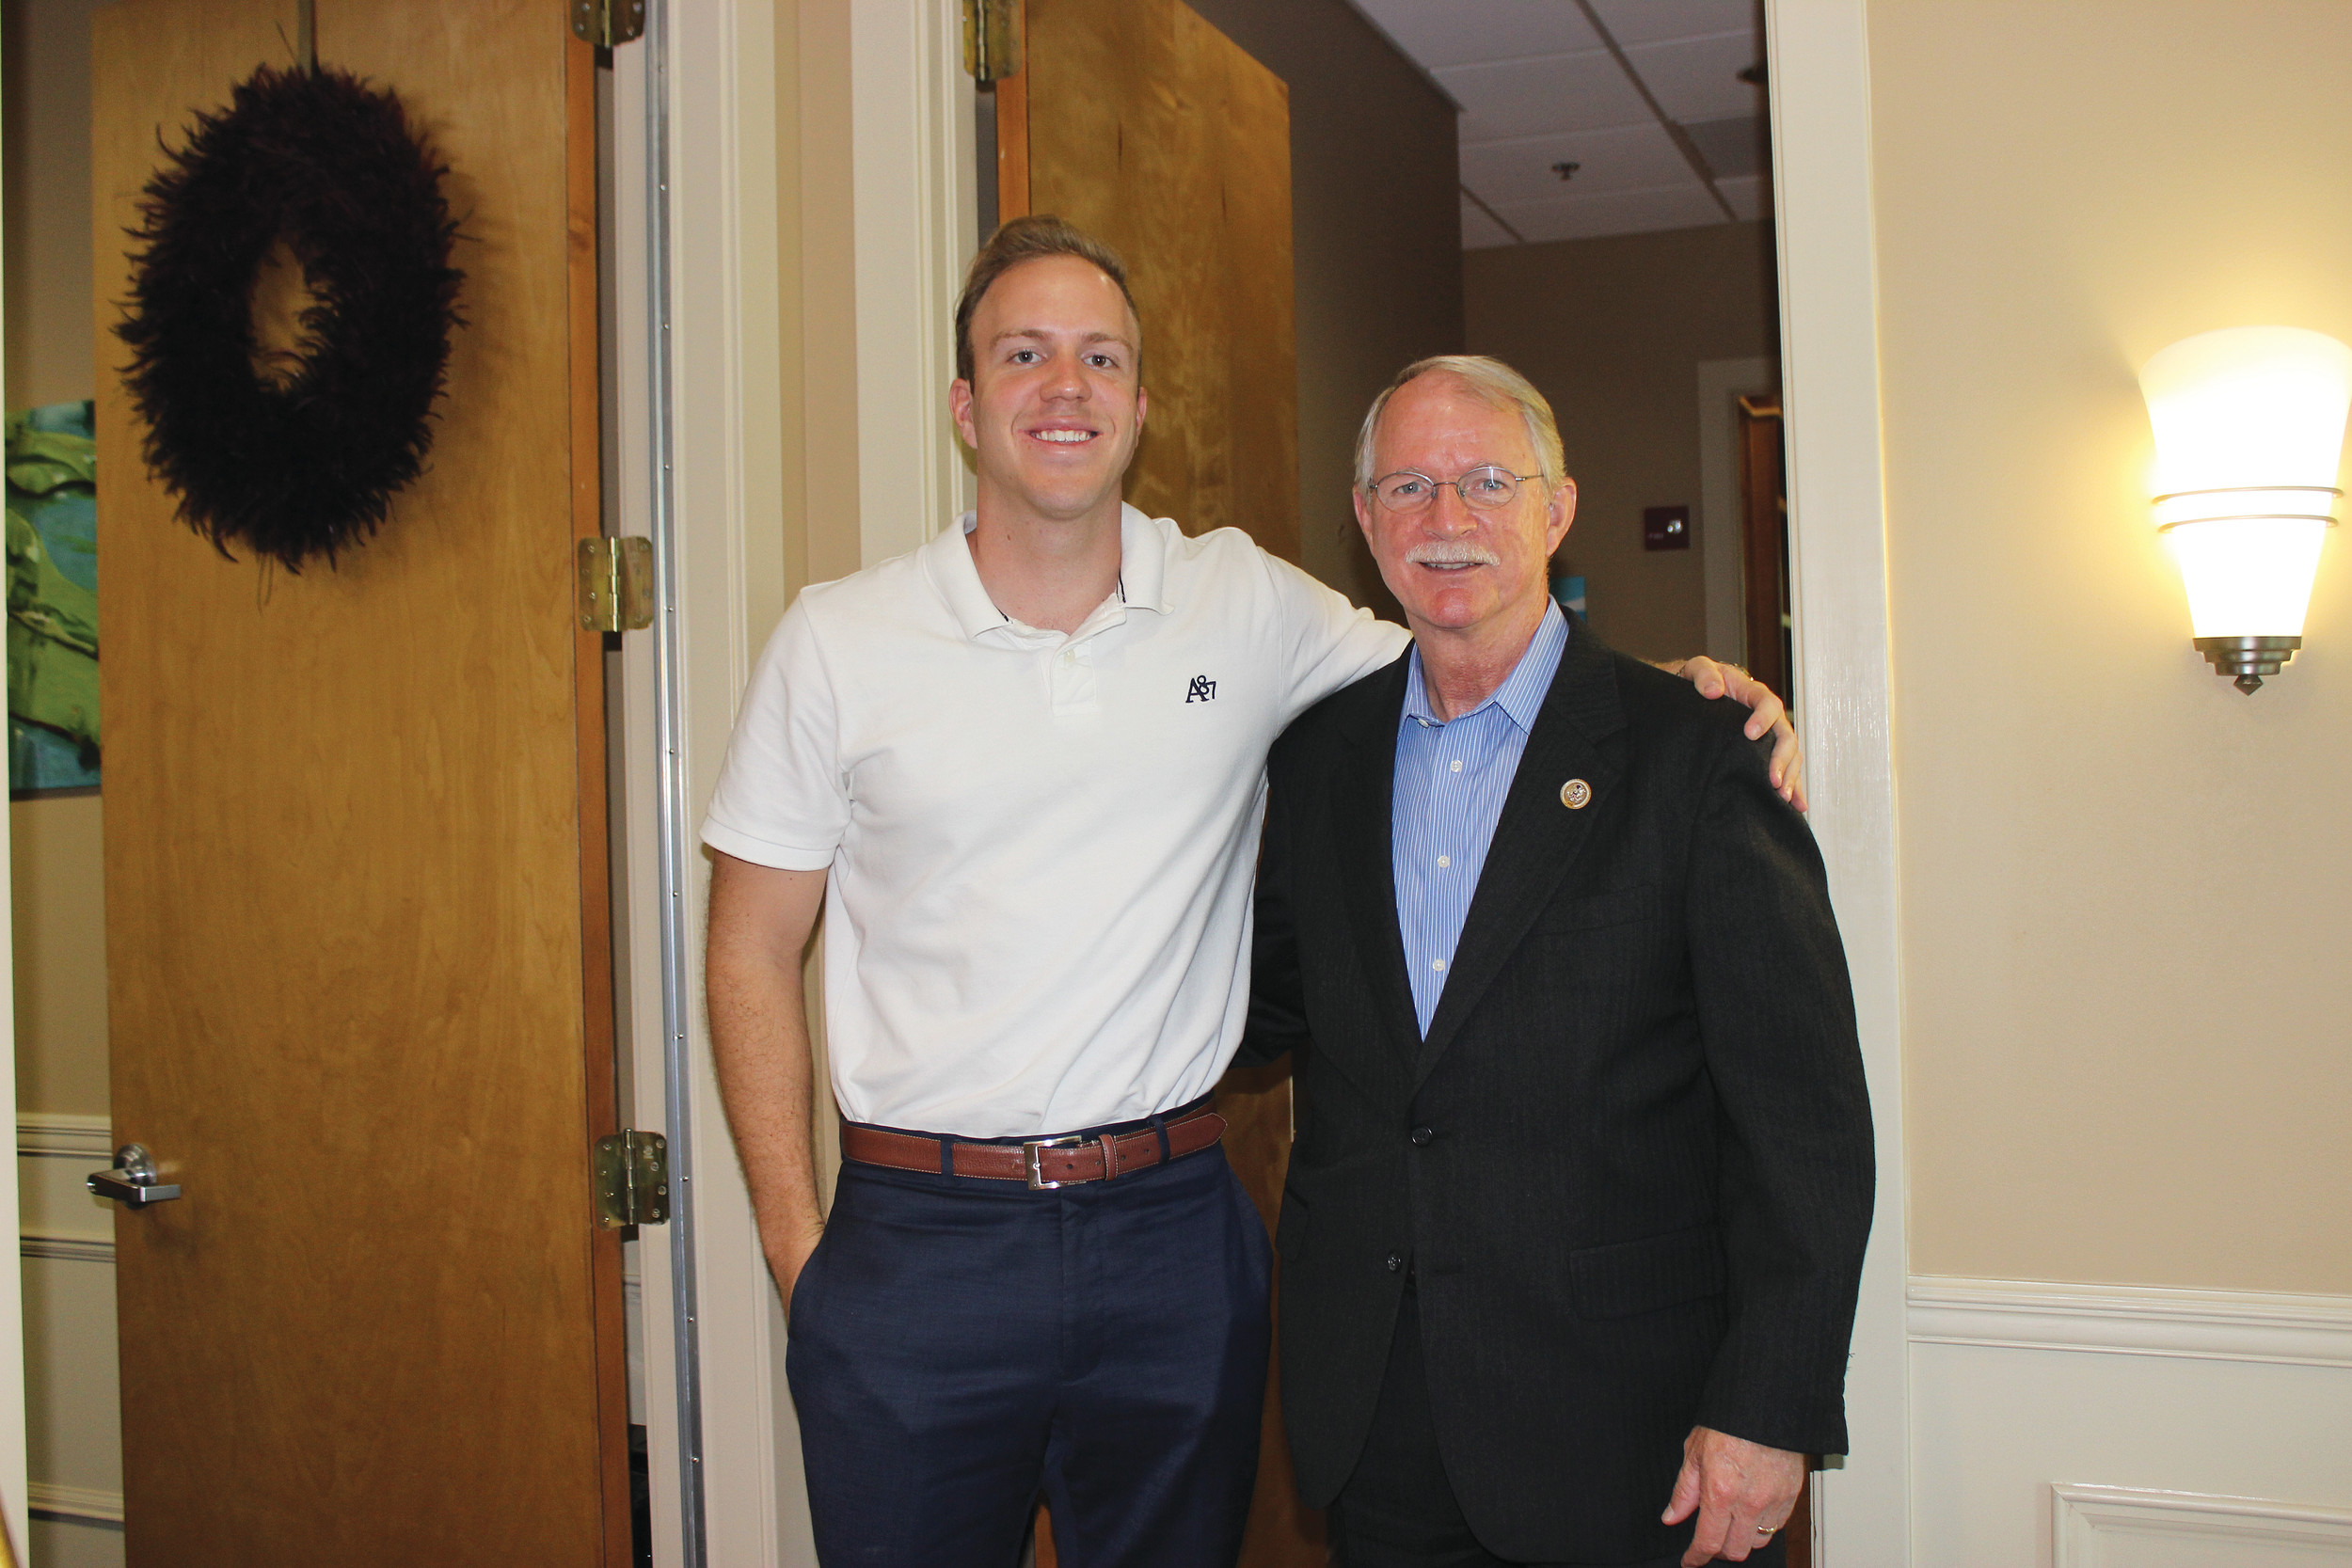 Ponte Vedra Recorder Editor Jon Blauvelt stands with Rep. John Rutherford (R-FL4) after he visited the Recorder’s office Aug. 24 for a meet-and-greet and to discuss recent accomplishments and future goals, as well as the current political landscape in America. The Recorder will provide updates on the freshman congressman’s journey and actions moving forward.